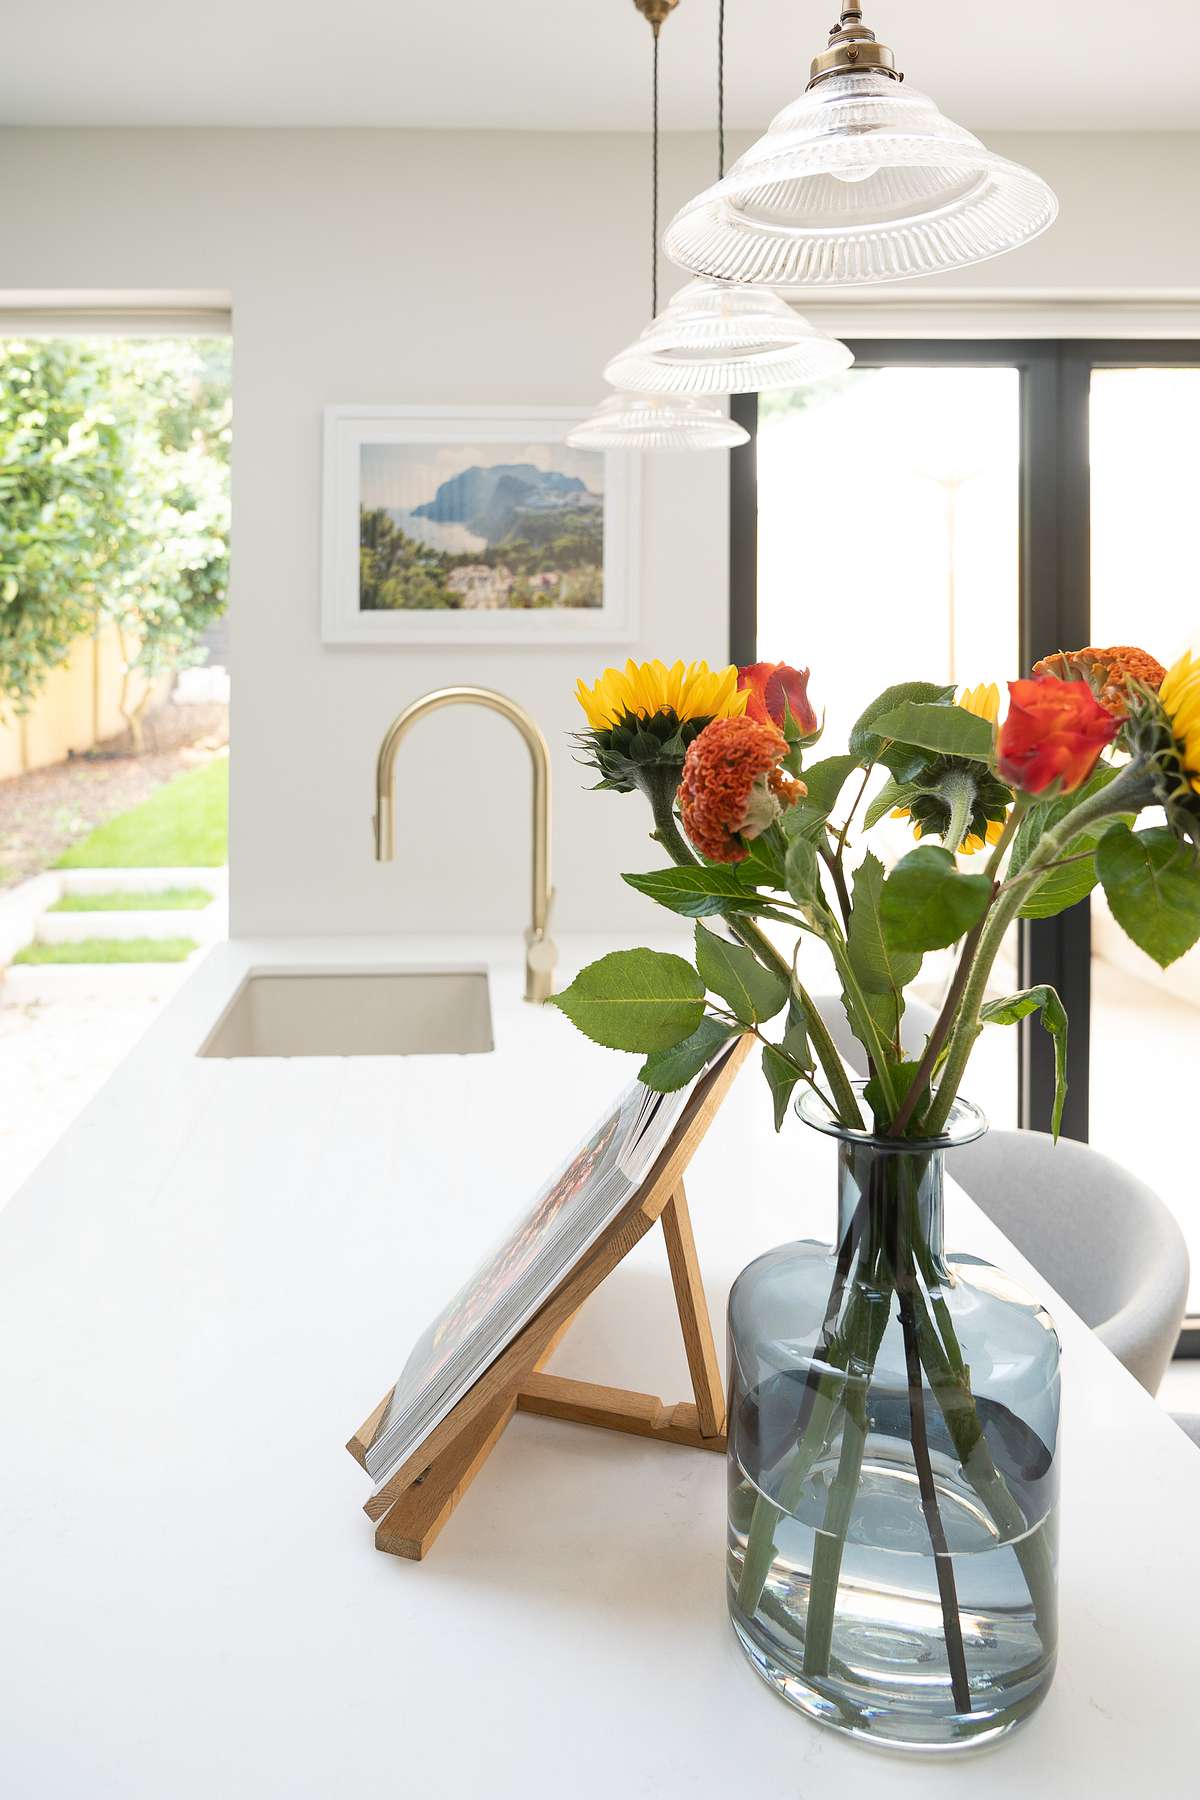 kitchen worktop surface with flowers in a vase